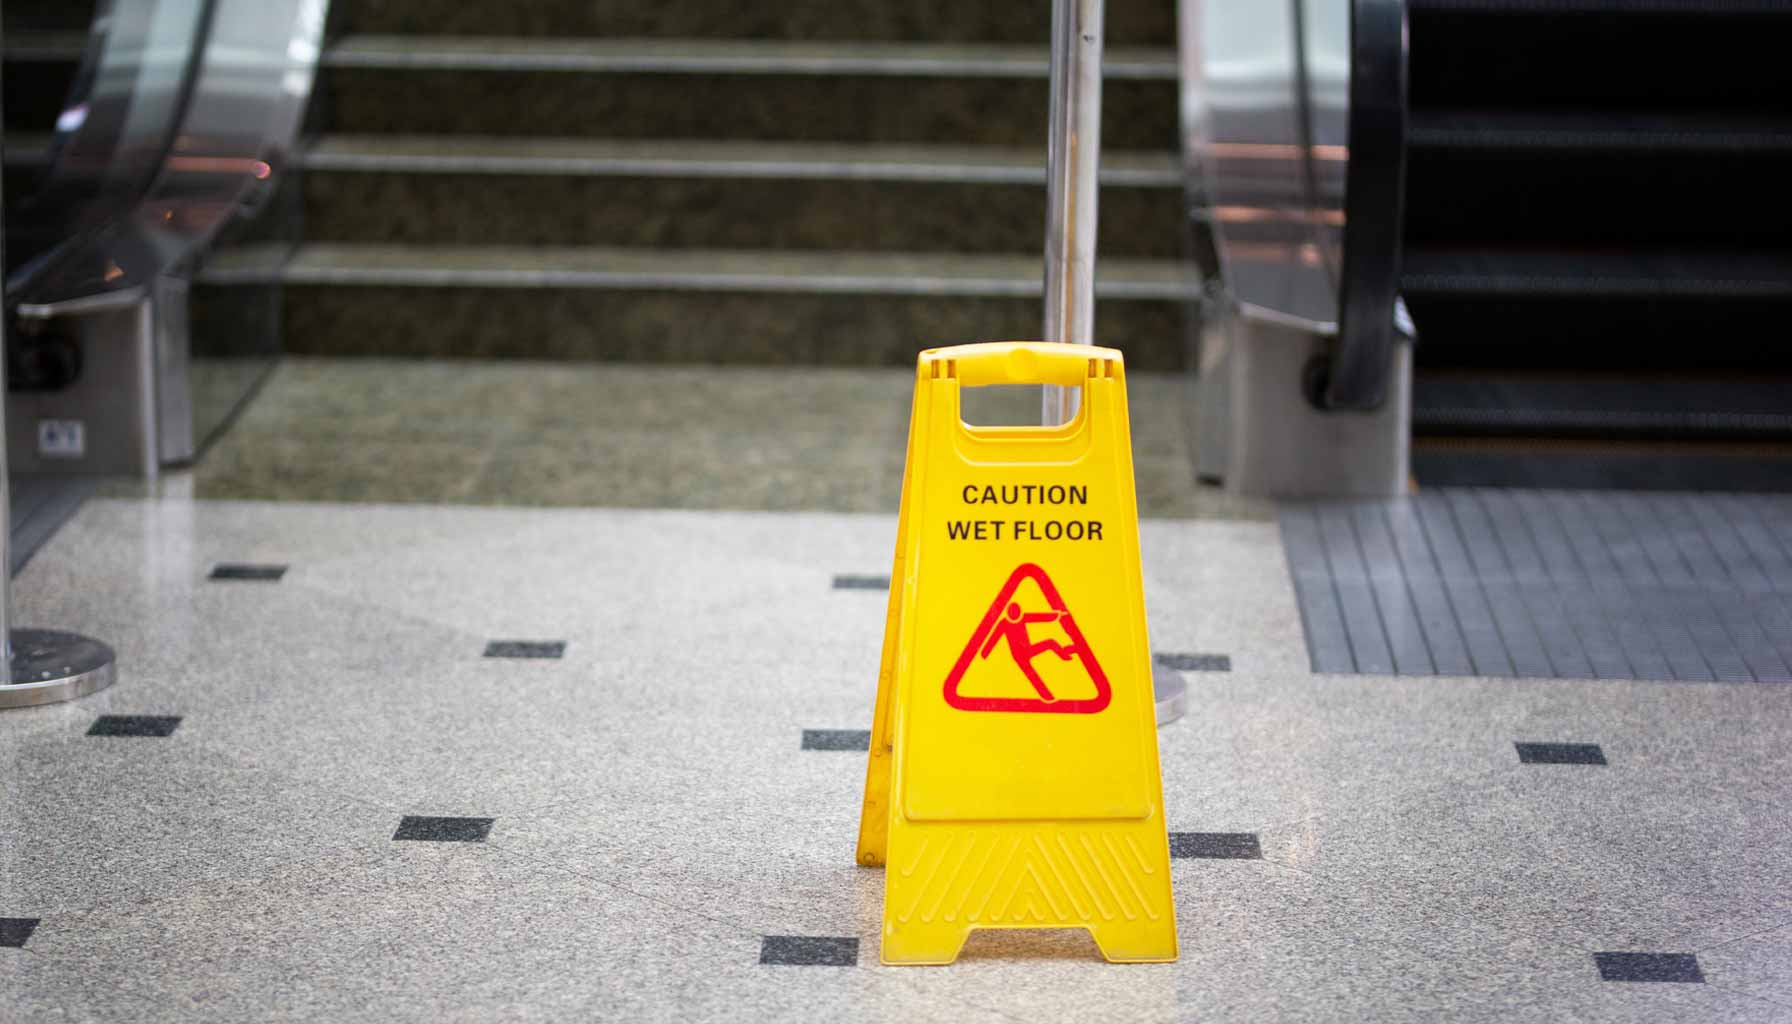 Slip and Fall accident prone area | Felice Trial Attorneys